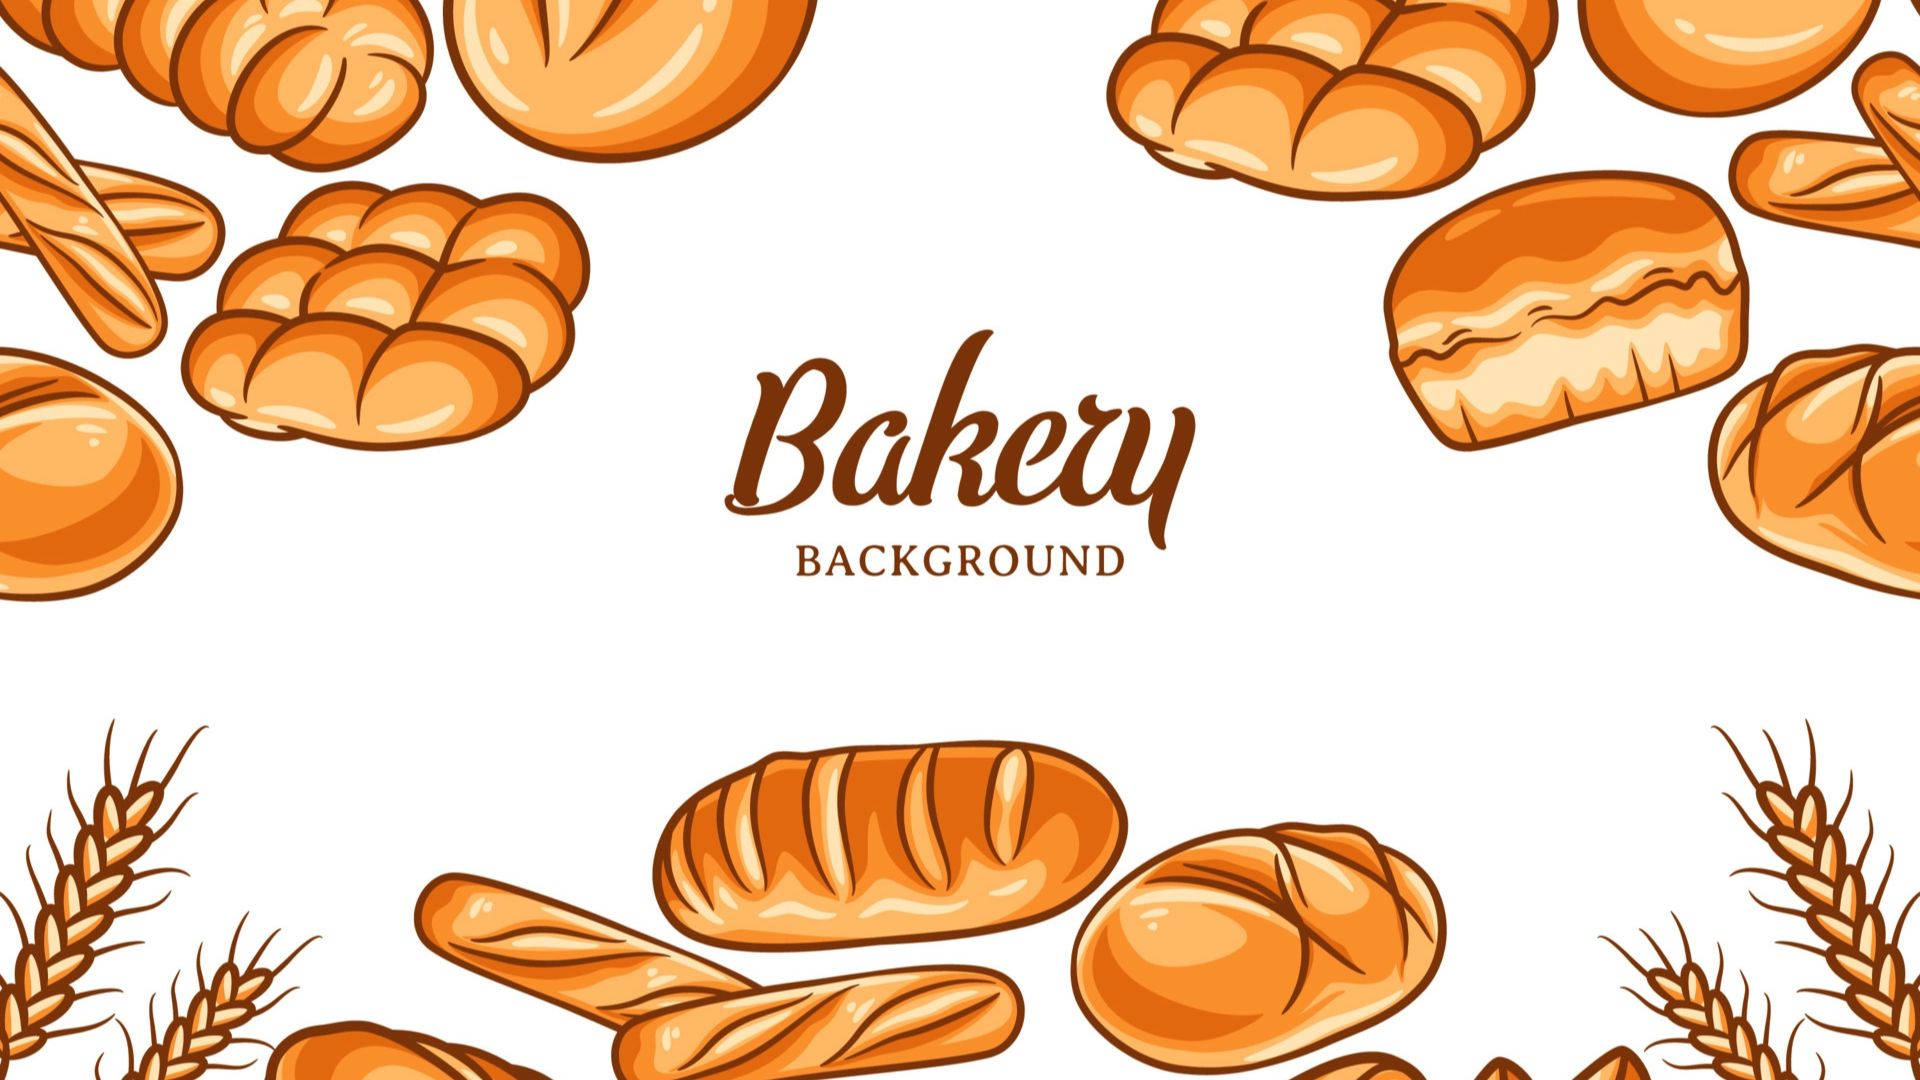 Bakery Background With Breads Wallpaper